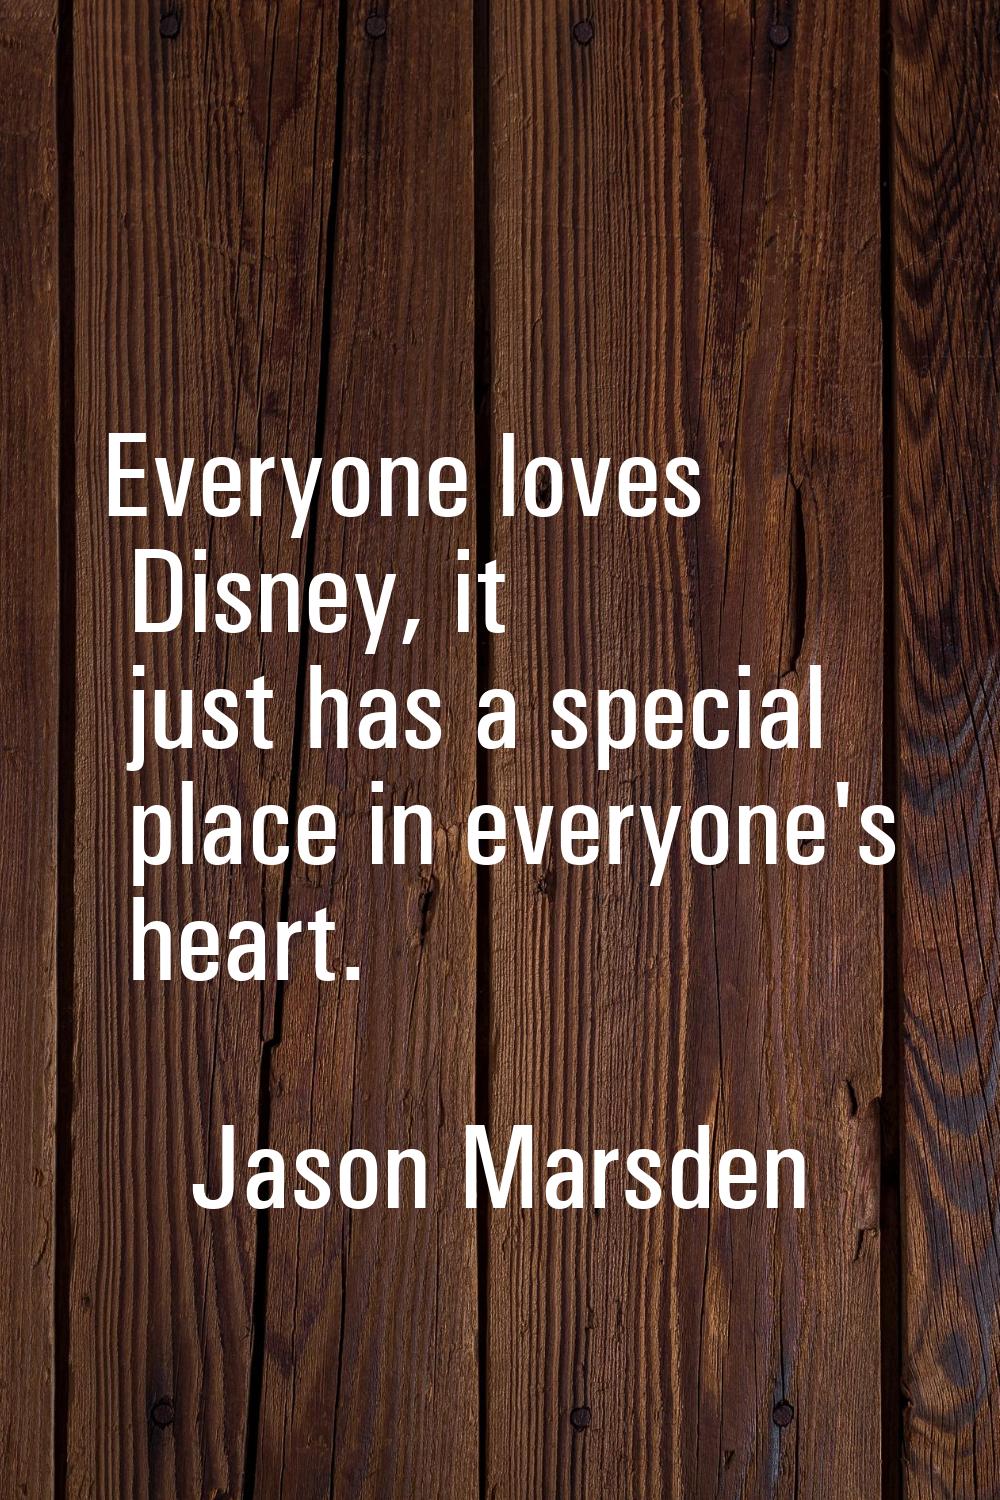 Everyone loves Disney, it just has a special place in everyone's heart.